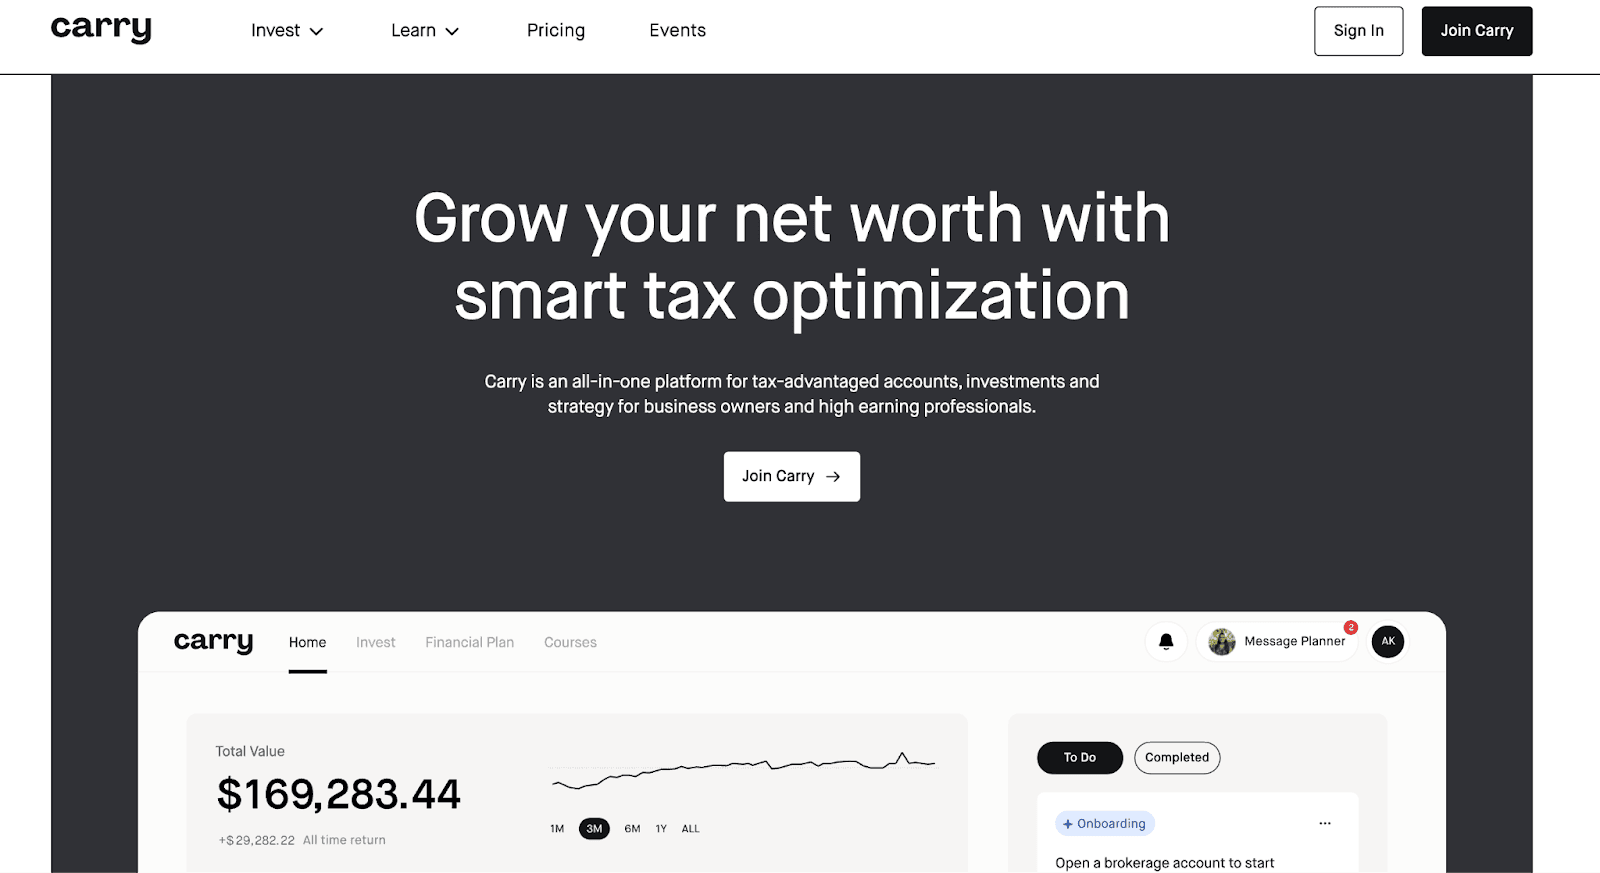 Carry website page "Grow your next worth with smart tax optimization" as an example of Product Marketing Strategies